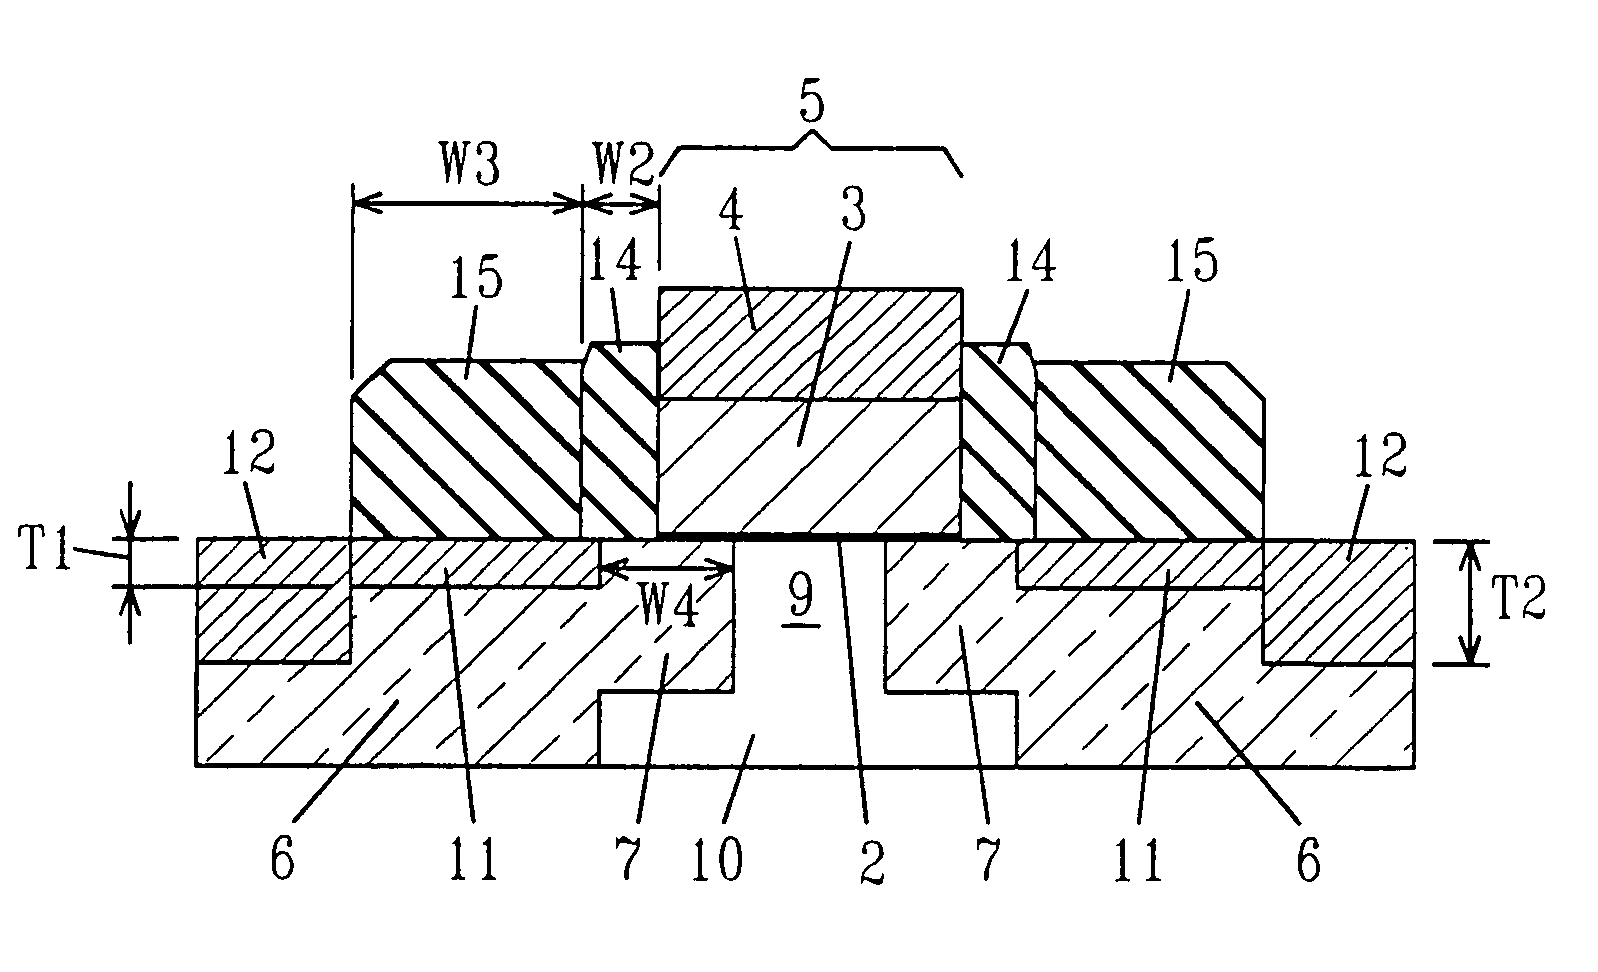 CMOS device integration for low external resistance